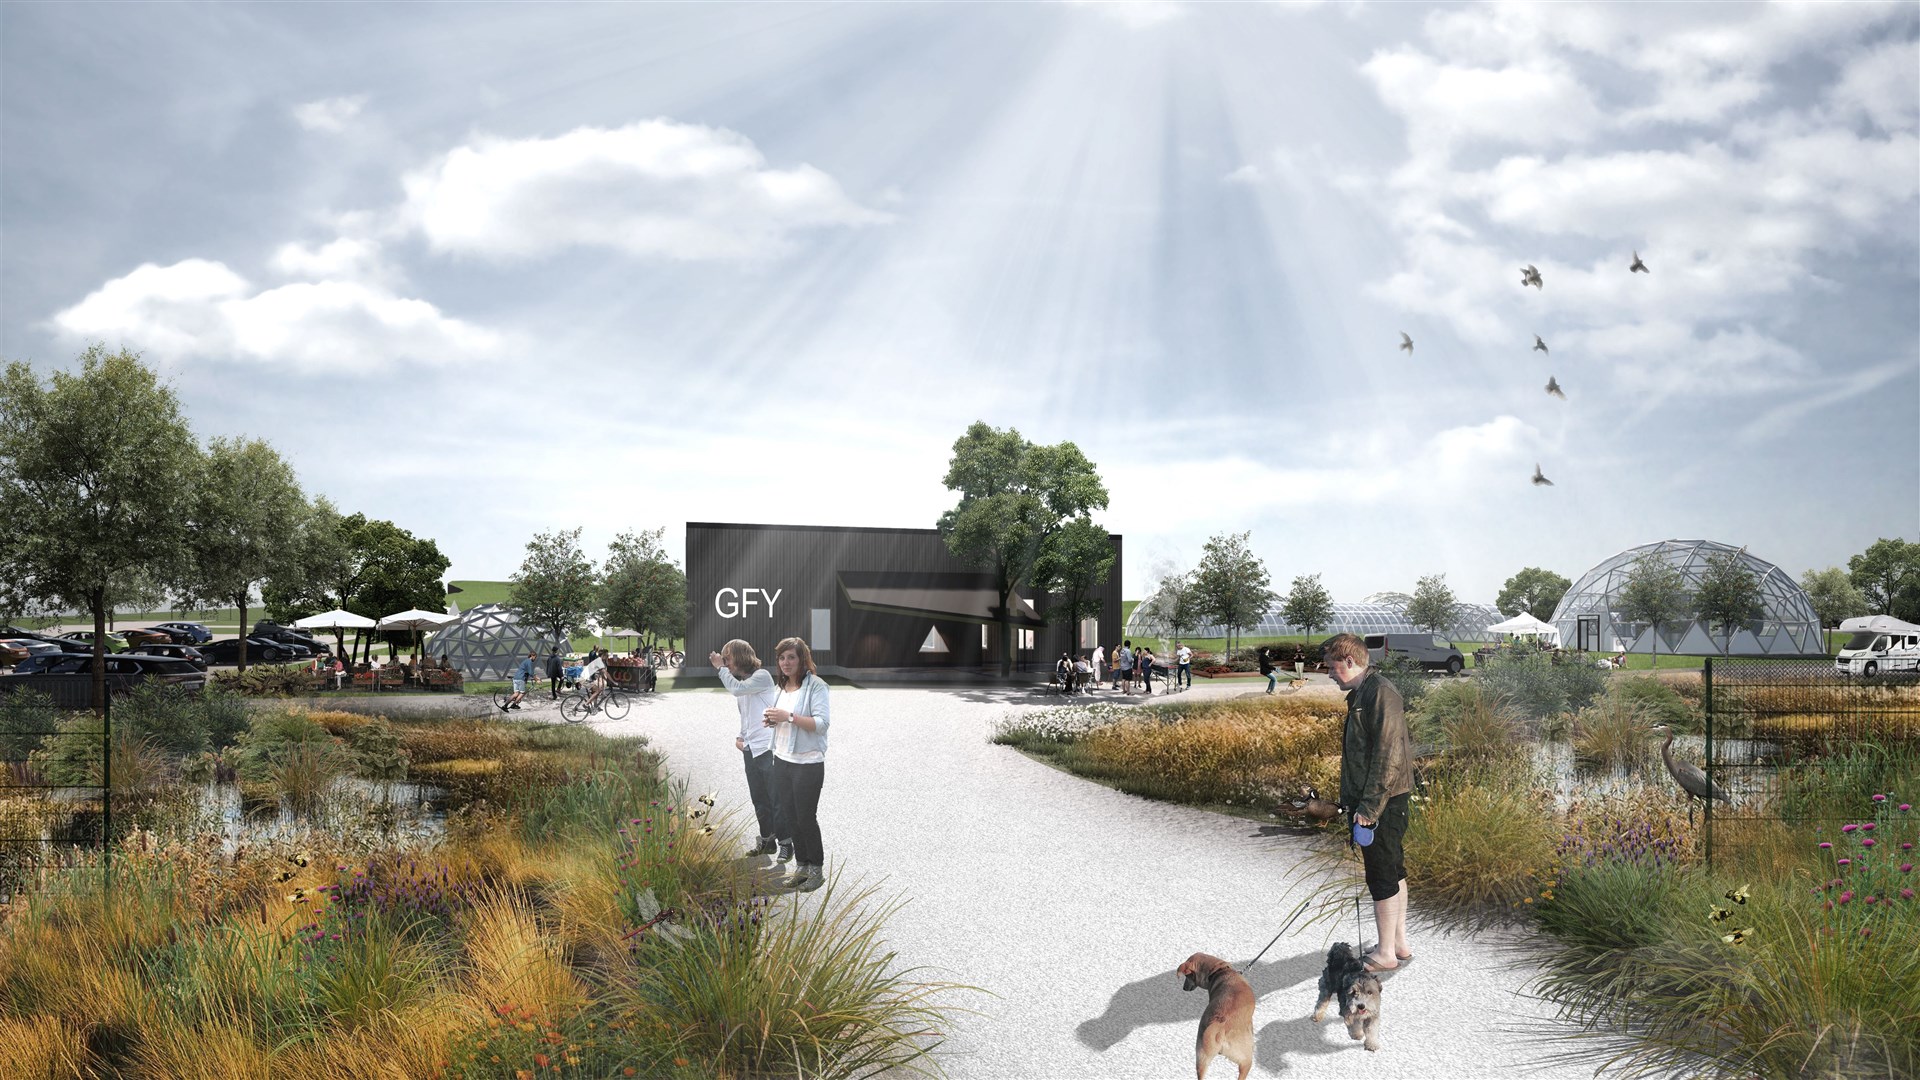 An artist's impression of the site from the entrance.